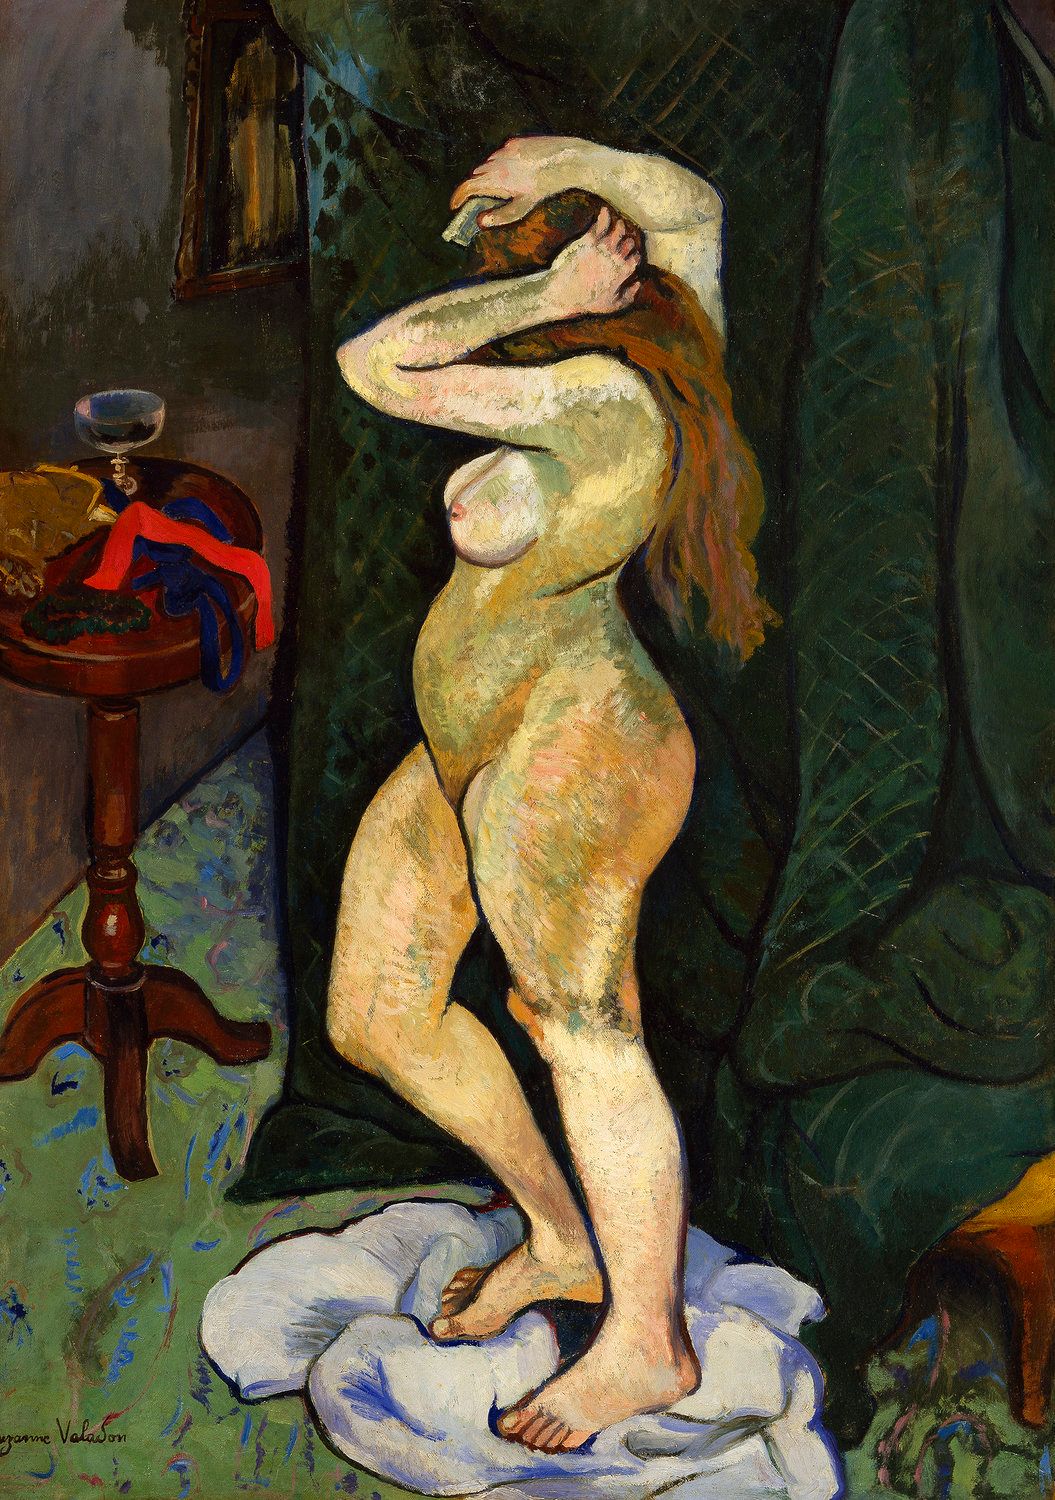 Suzanne Valadon, "Nude Doing Her Hair," ca. 1916.